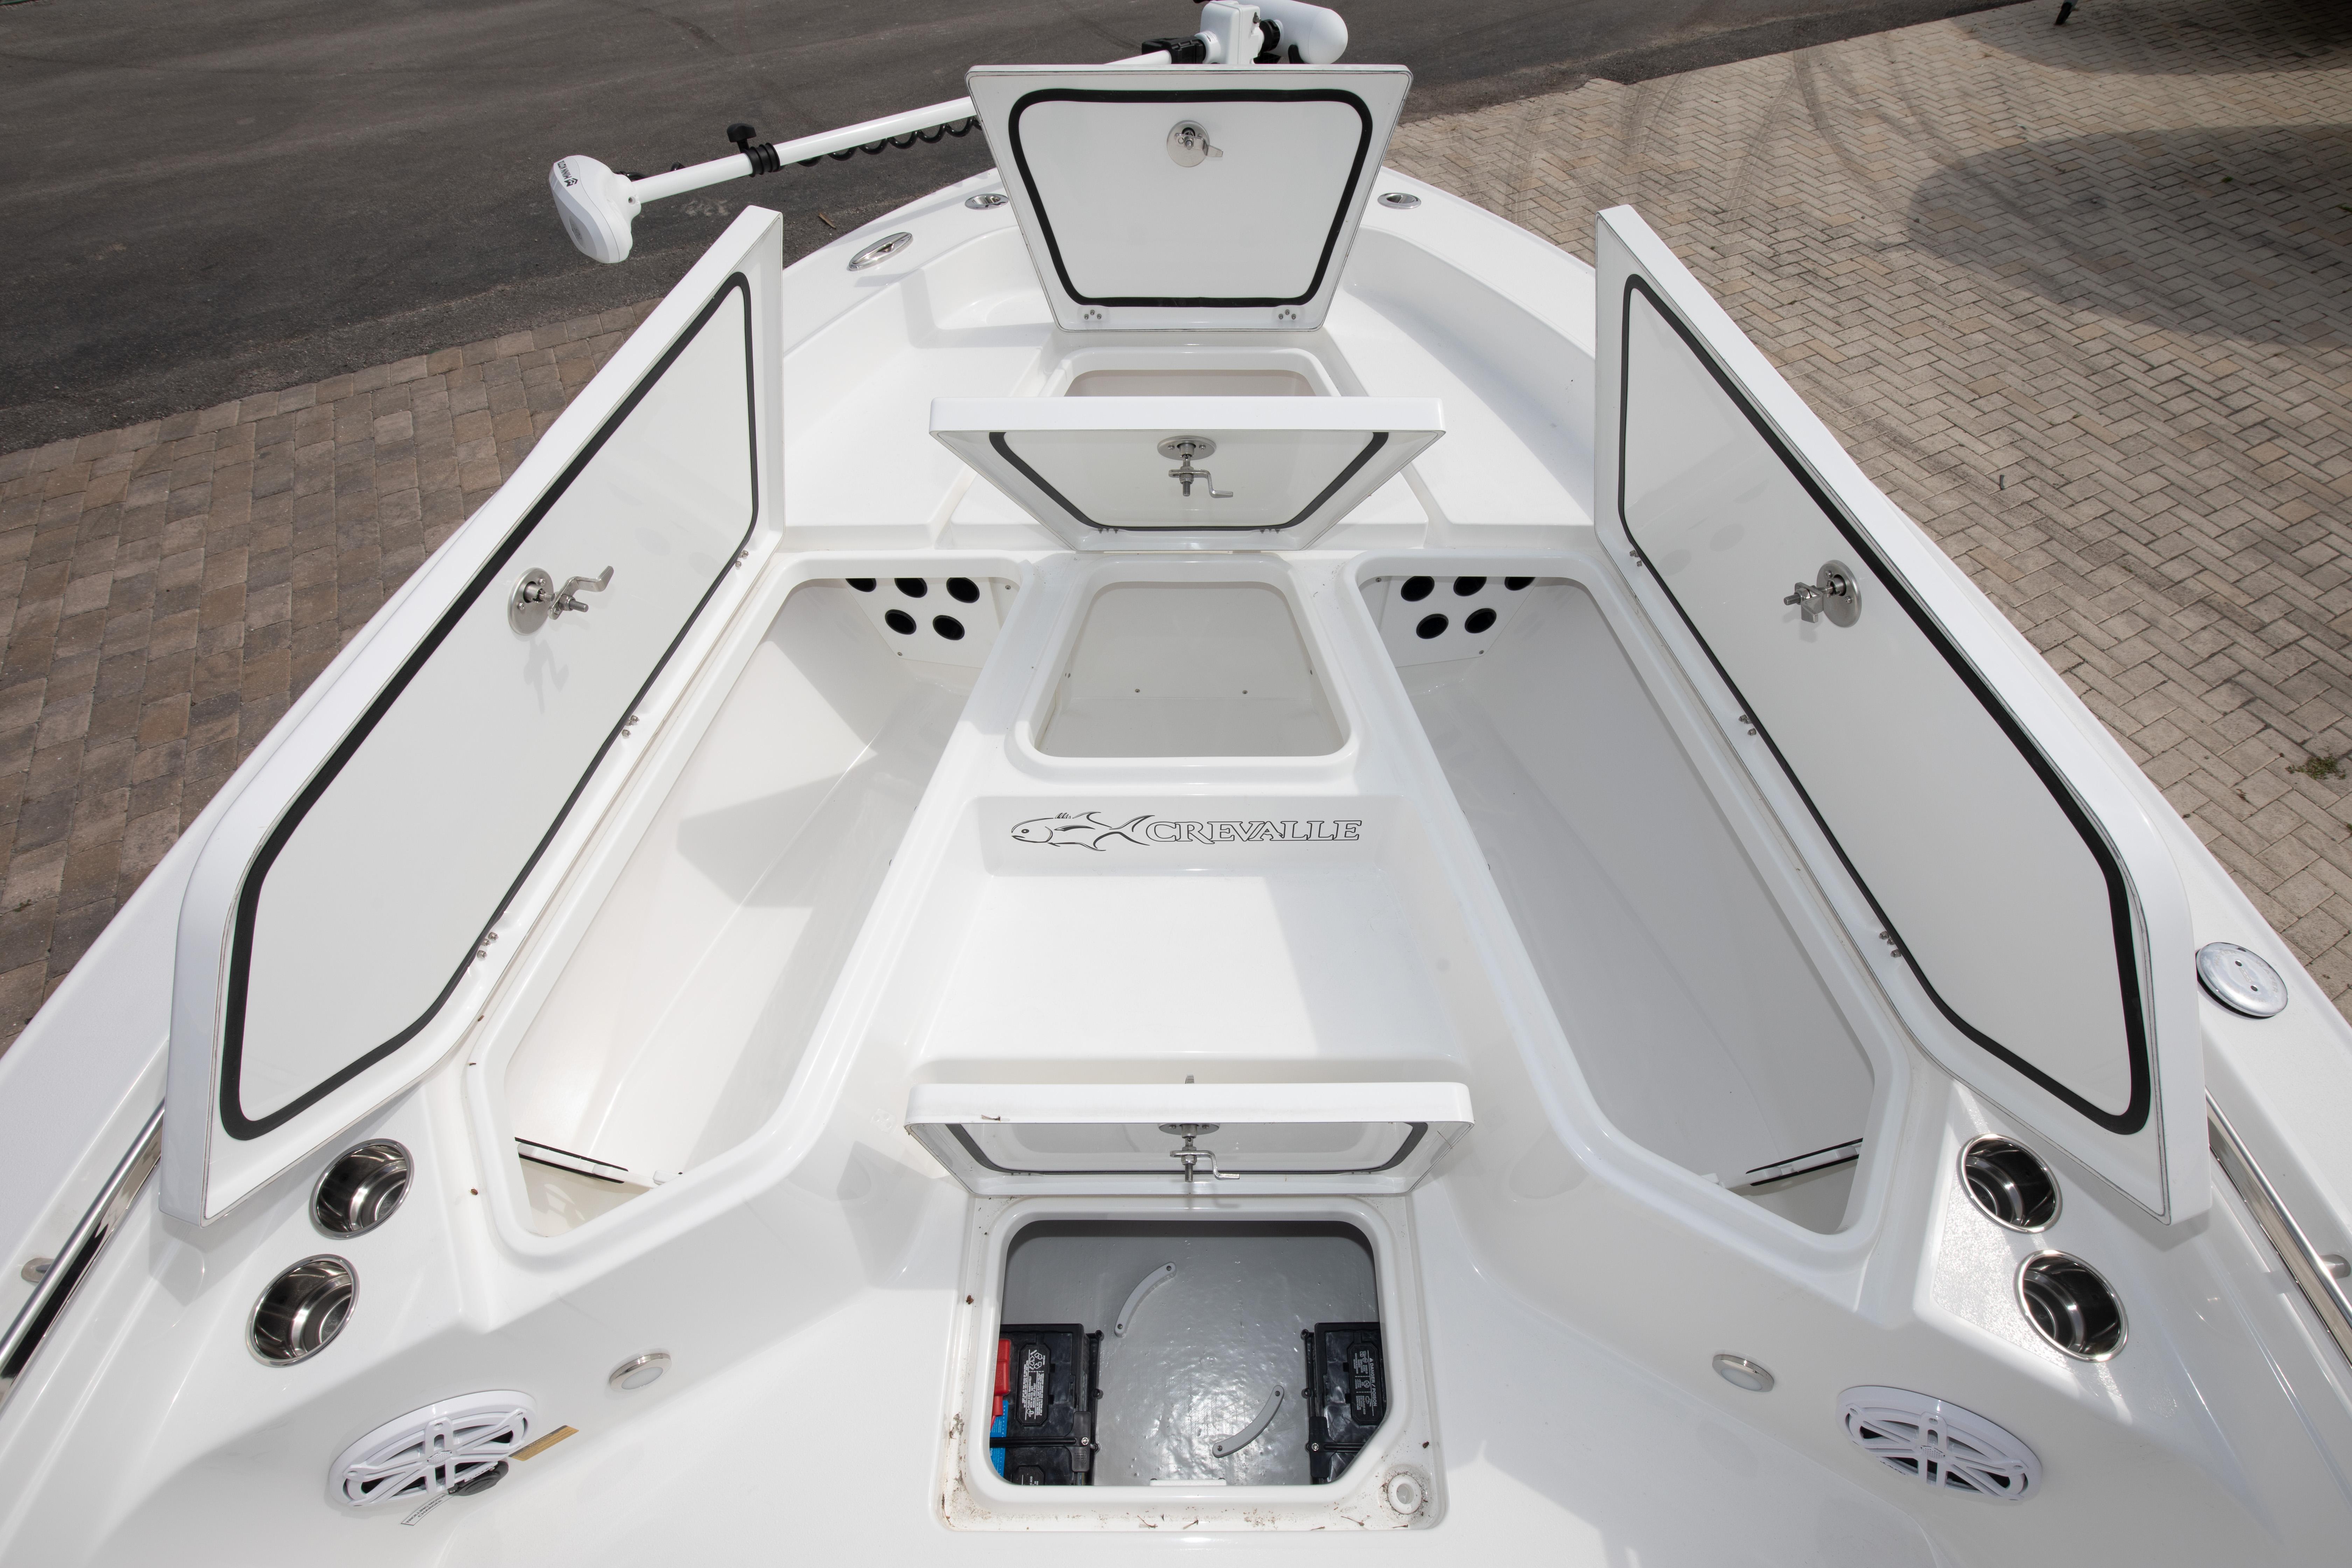 2023 Crevalle 26 HCO Center Console for sale - YachtWorld